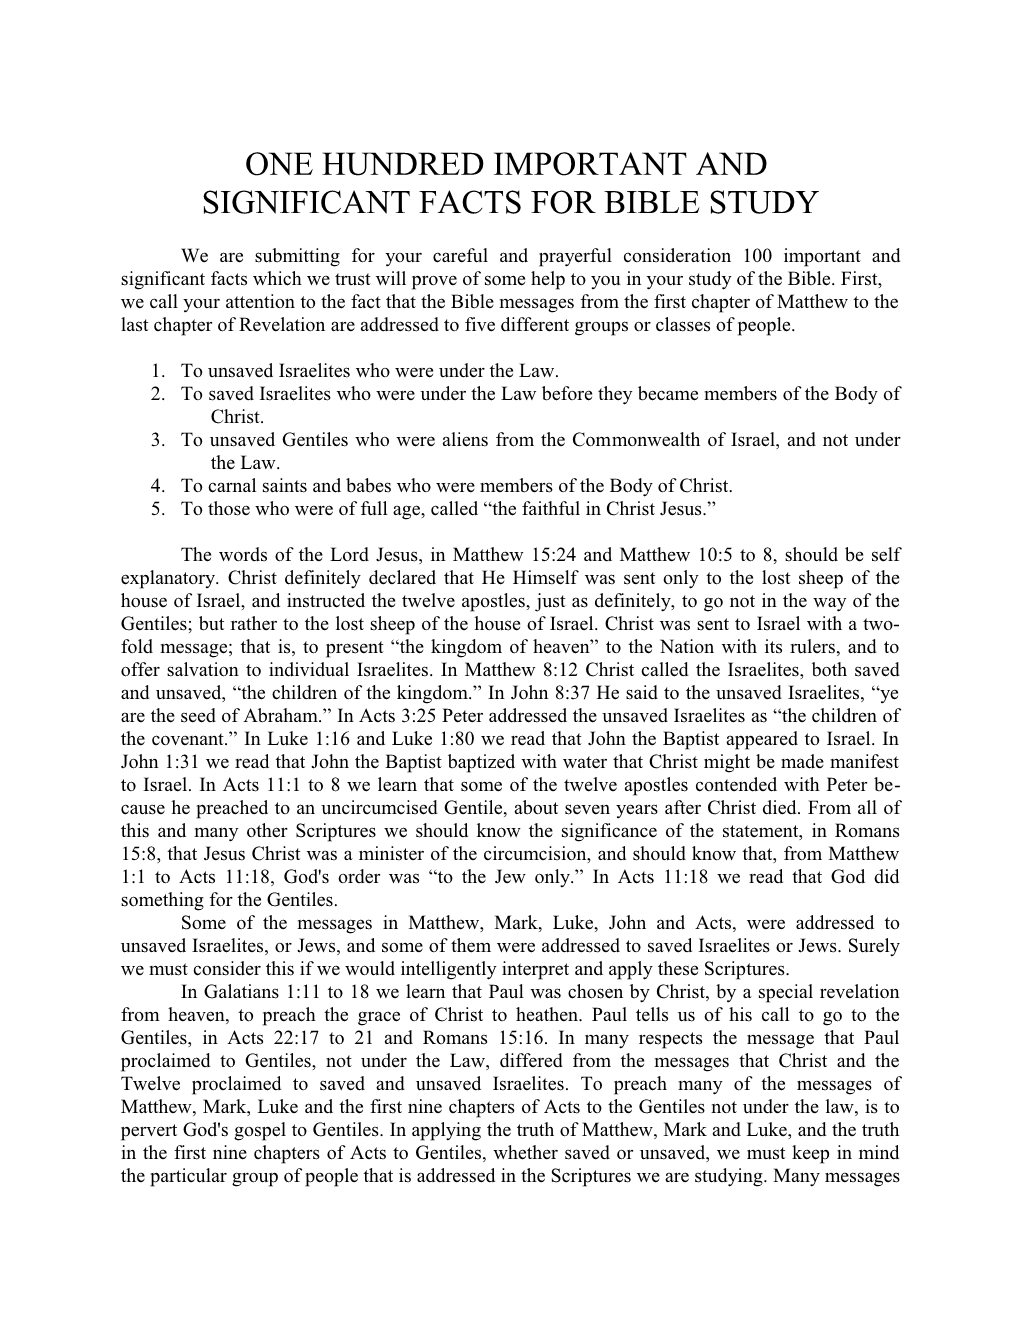 One Hundred Important and Significant Facts for Bible Study